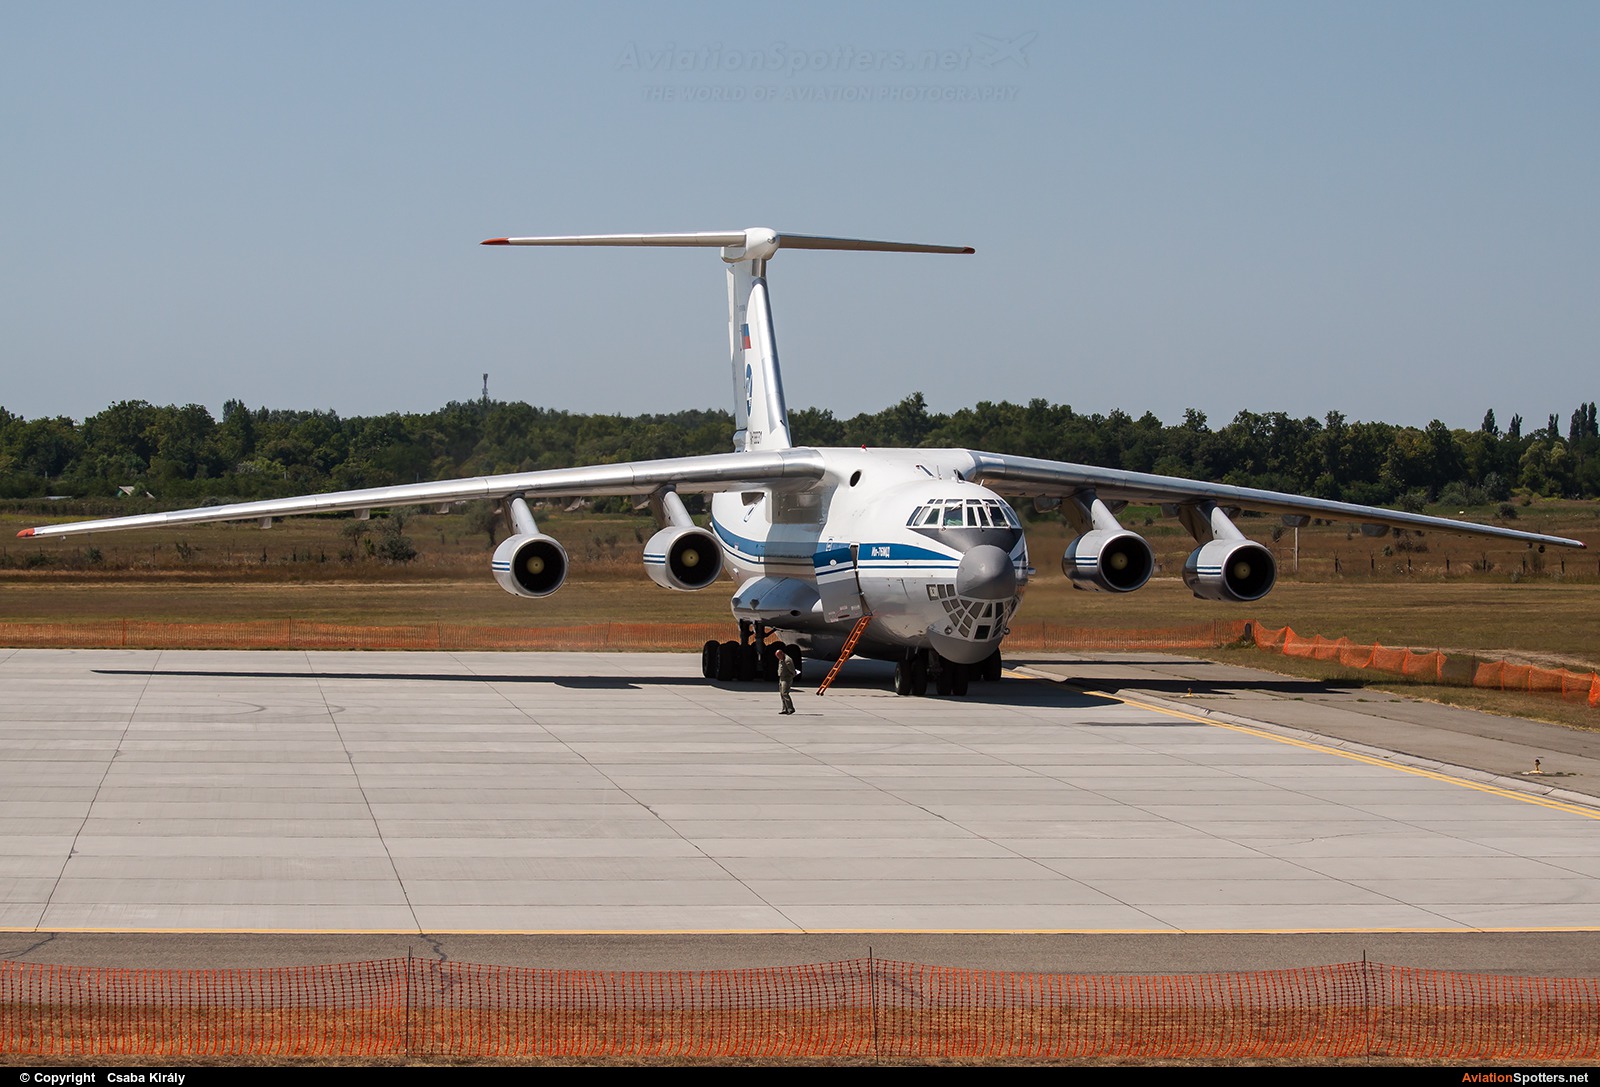 Russia - Air Force  -  Il-76MD  (RA-78831) By Csaba Király (Csaba Kiraly)